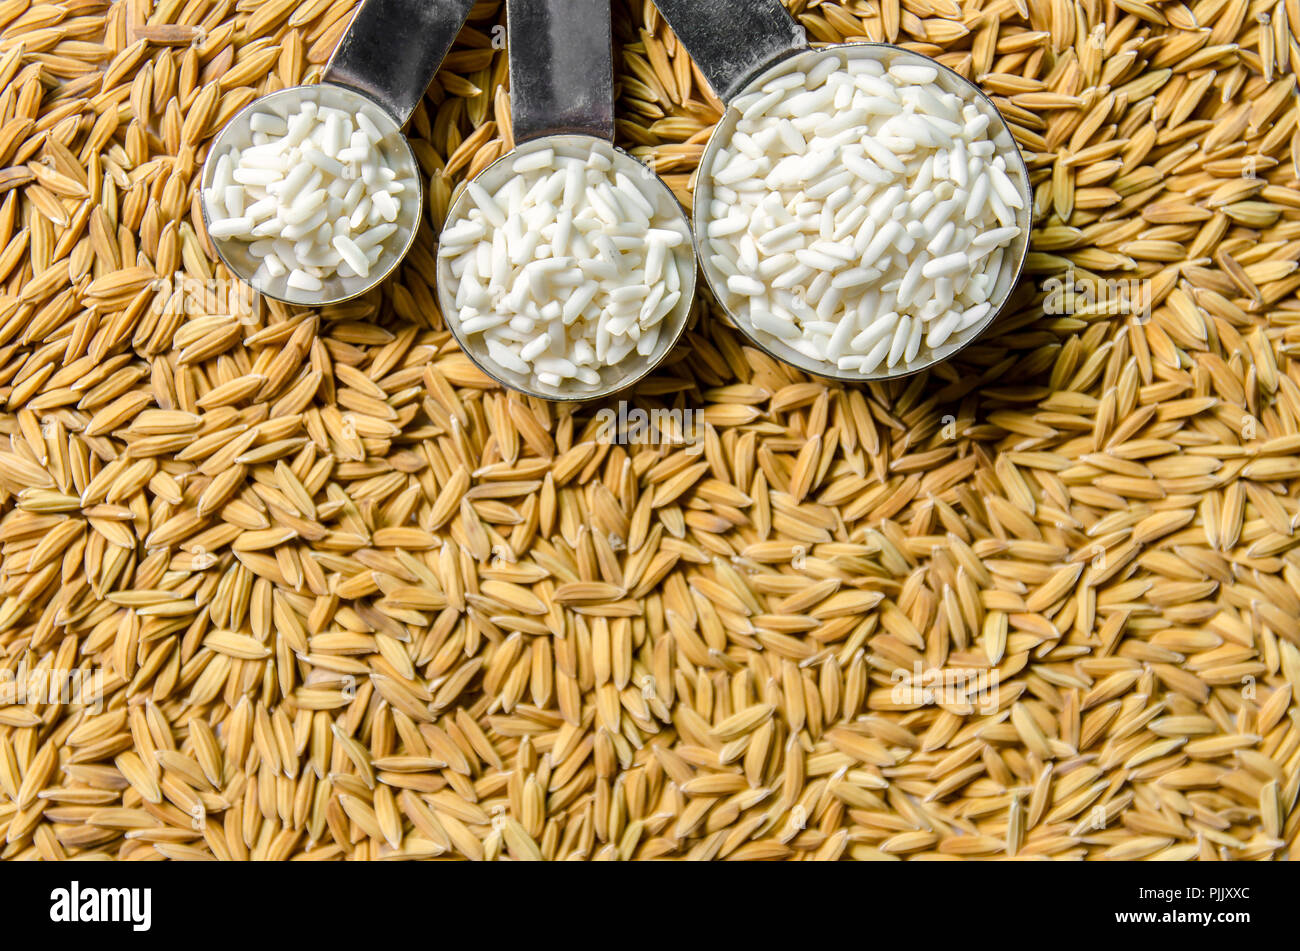 Top view of paddy rice and rice seed on the floor, Background and wallpaper by pile of paddy rice seed, Close-up of brown and white rice grain. Stock Photo